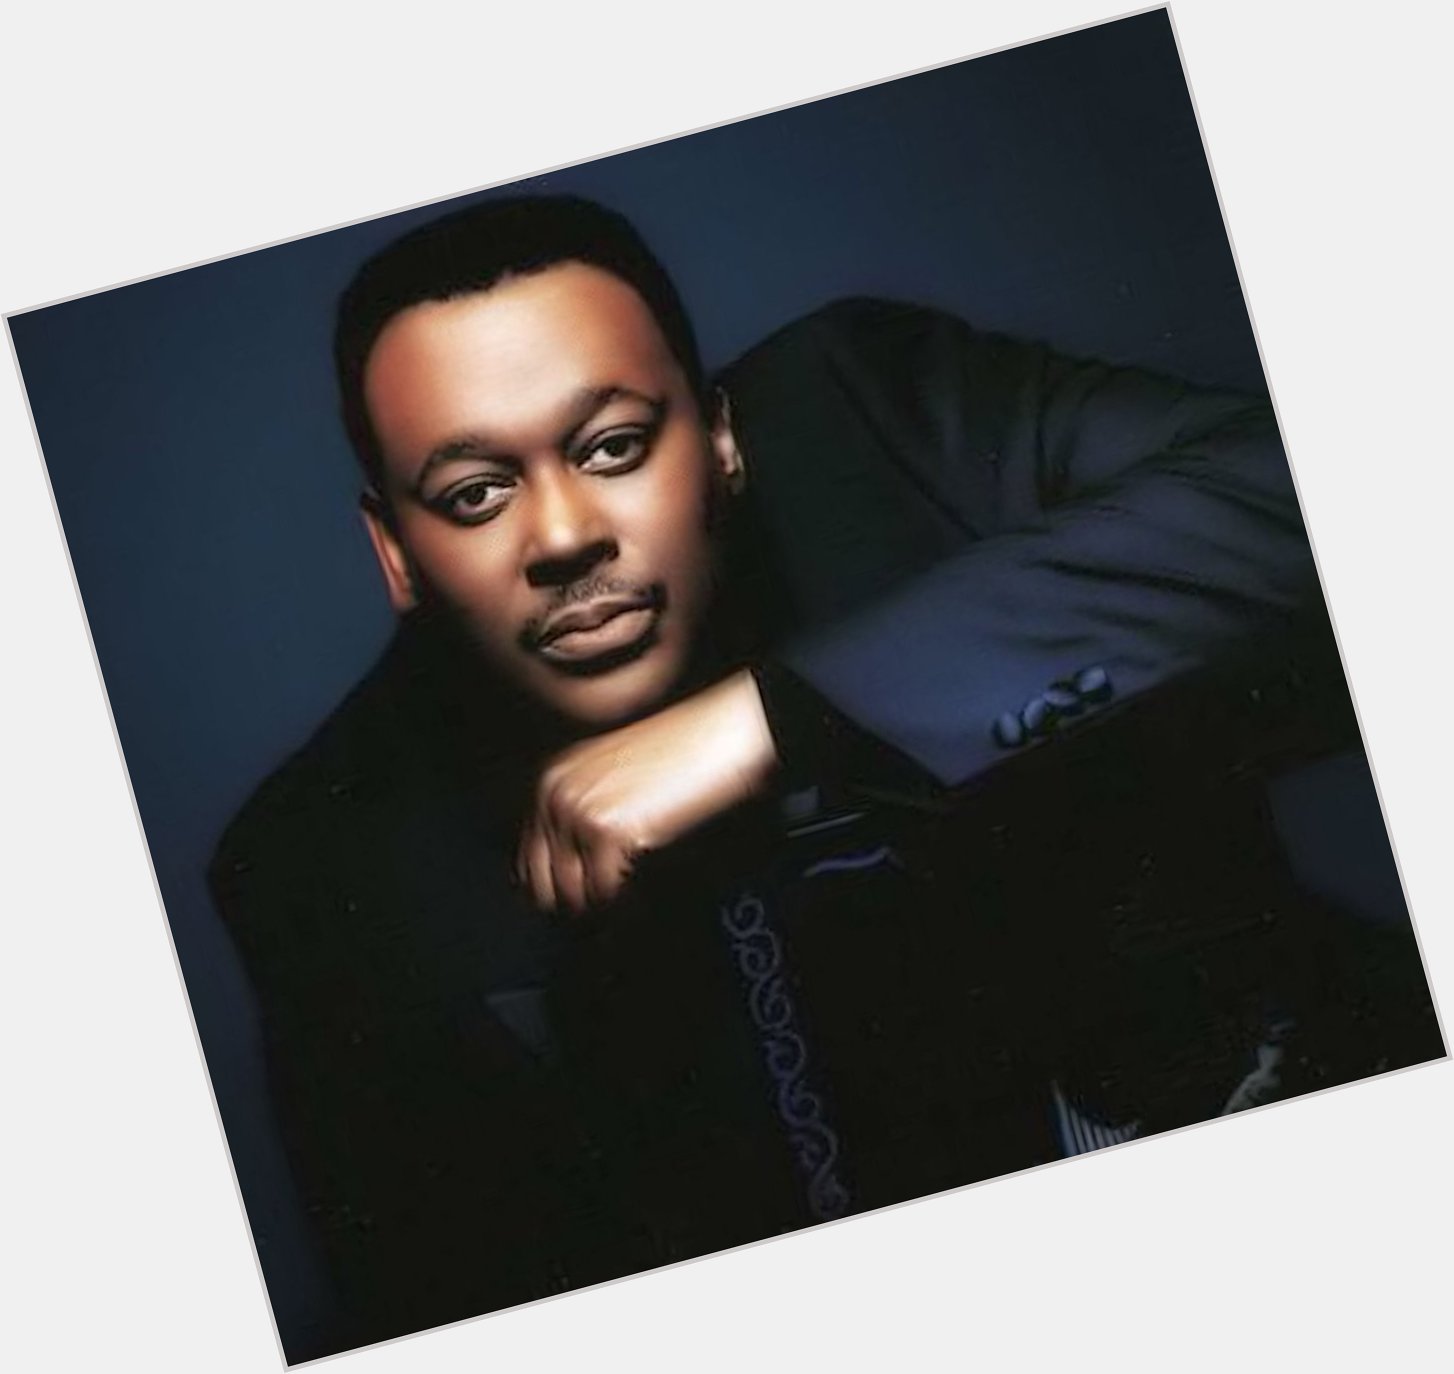 Happy birthday Luther Vandross... One of the greatest vocalist. He would have been 70 today 